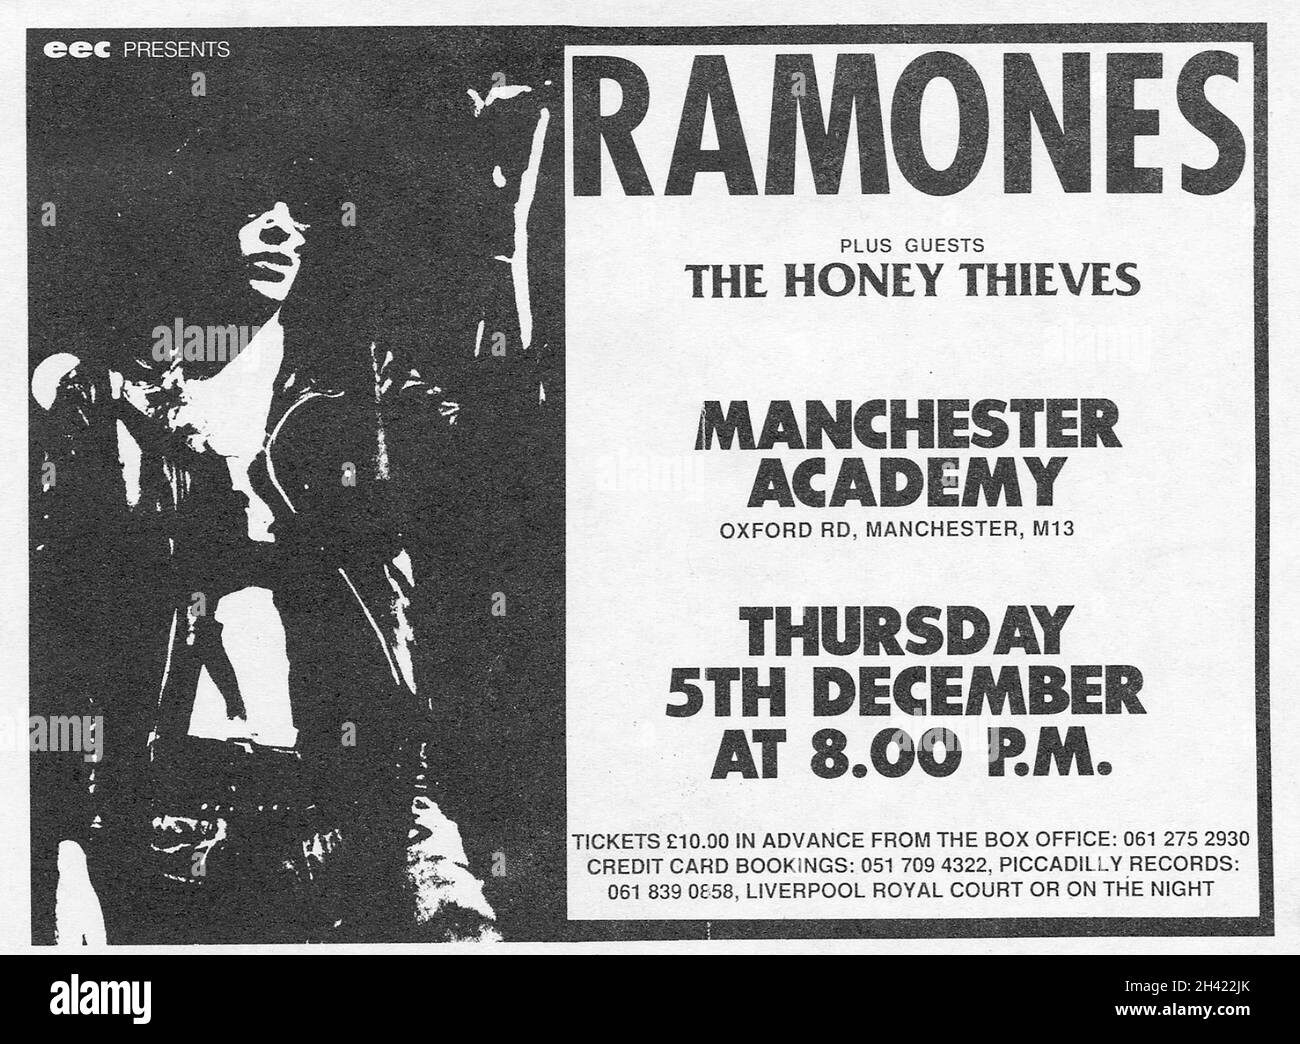 The Ramones Original UK Concert Flyer for a show at Manchester Academy, Oxford Road, Manchester, on December 5. 1985.  Litho printed in black on white matt paper. These were given out at local record stores to advertise the show, with tickets priced at £10. Support band were The Honey Thieves. Stock Photo